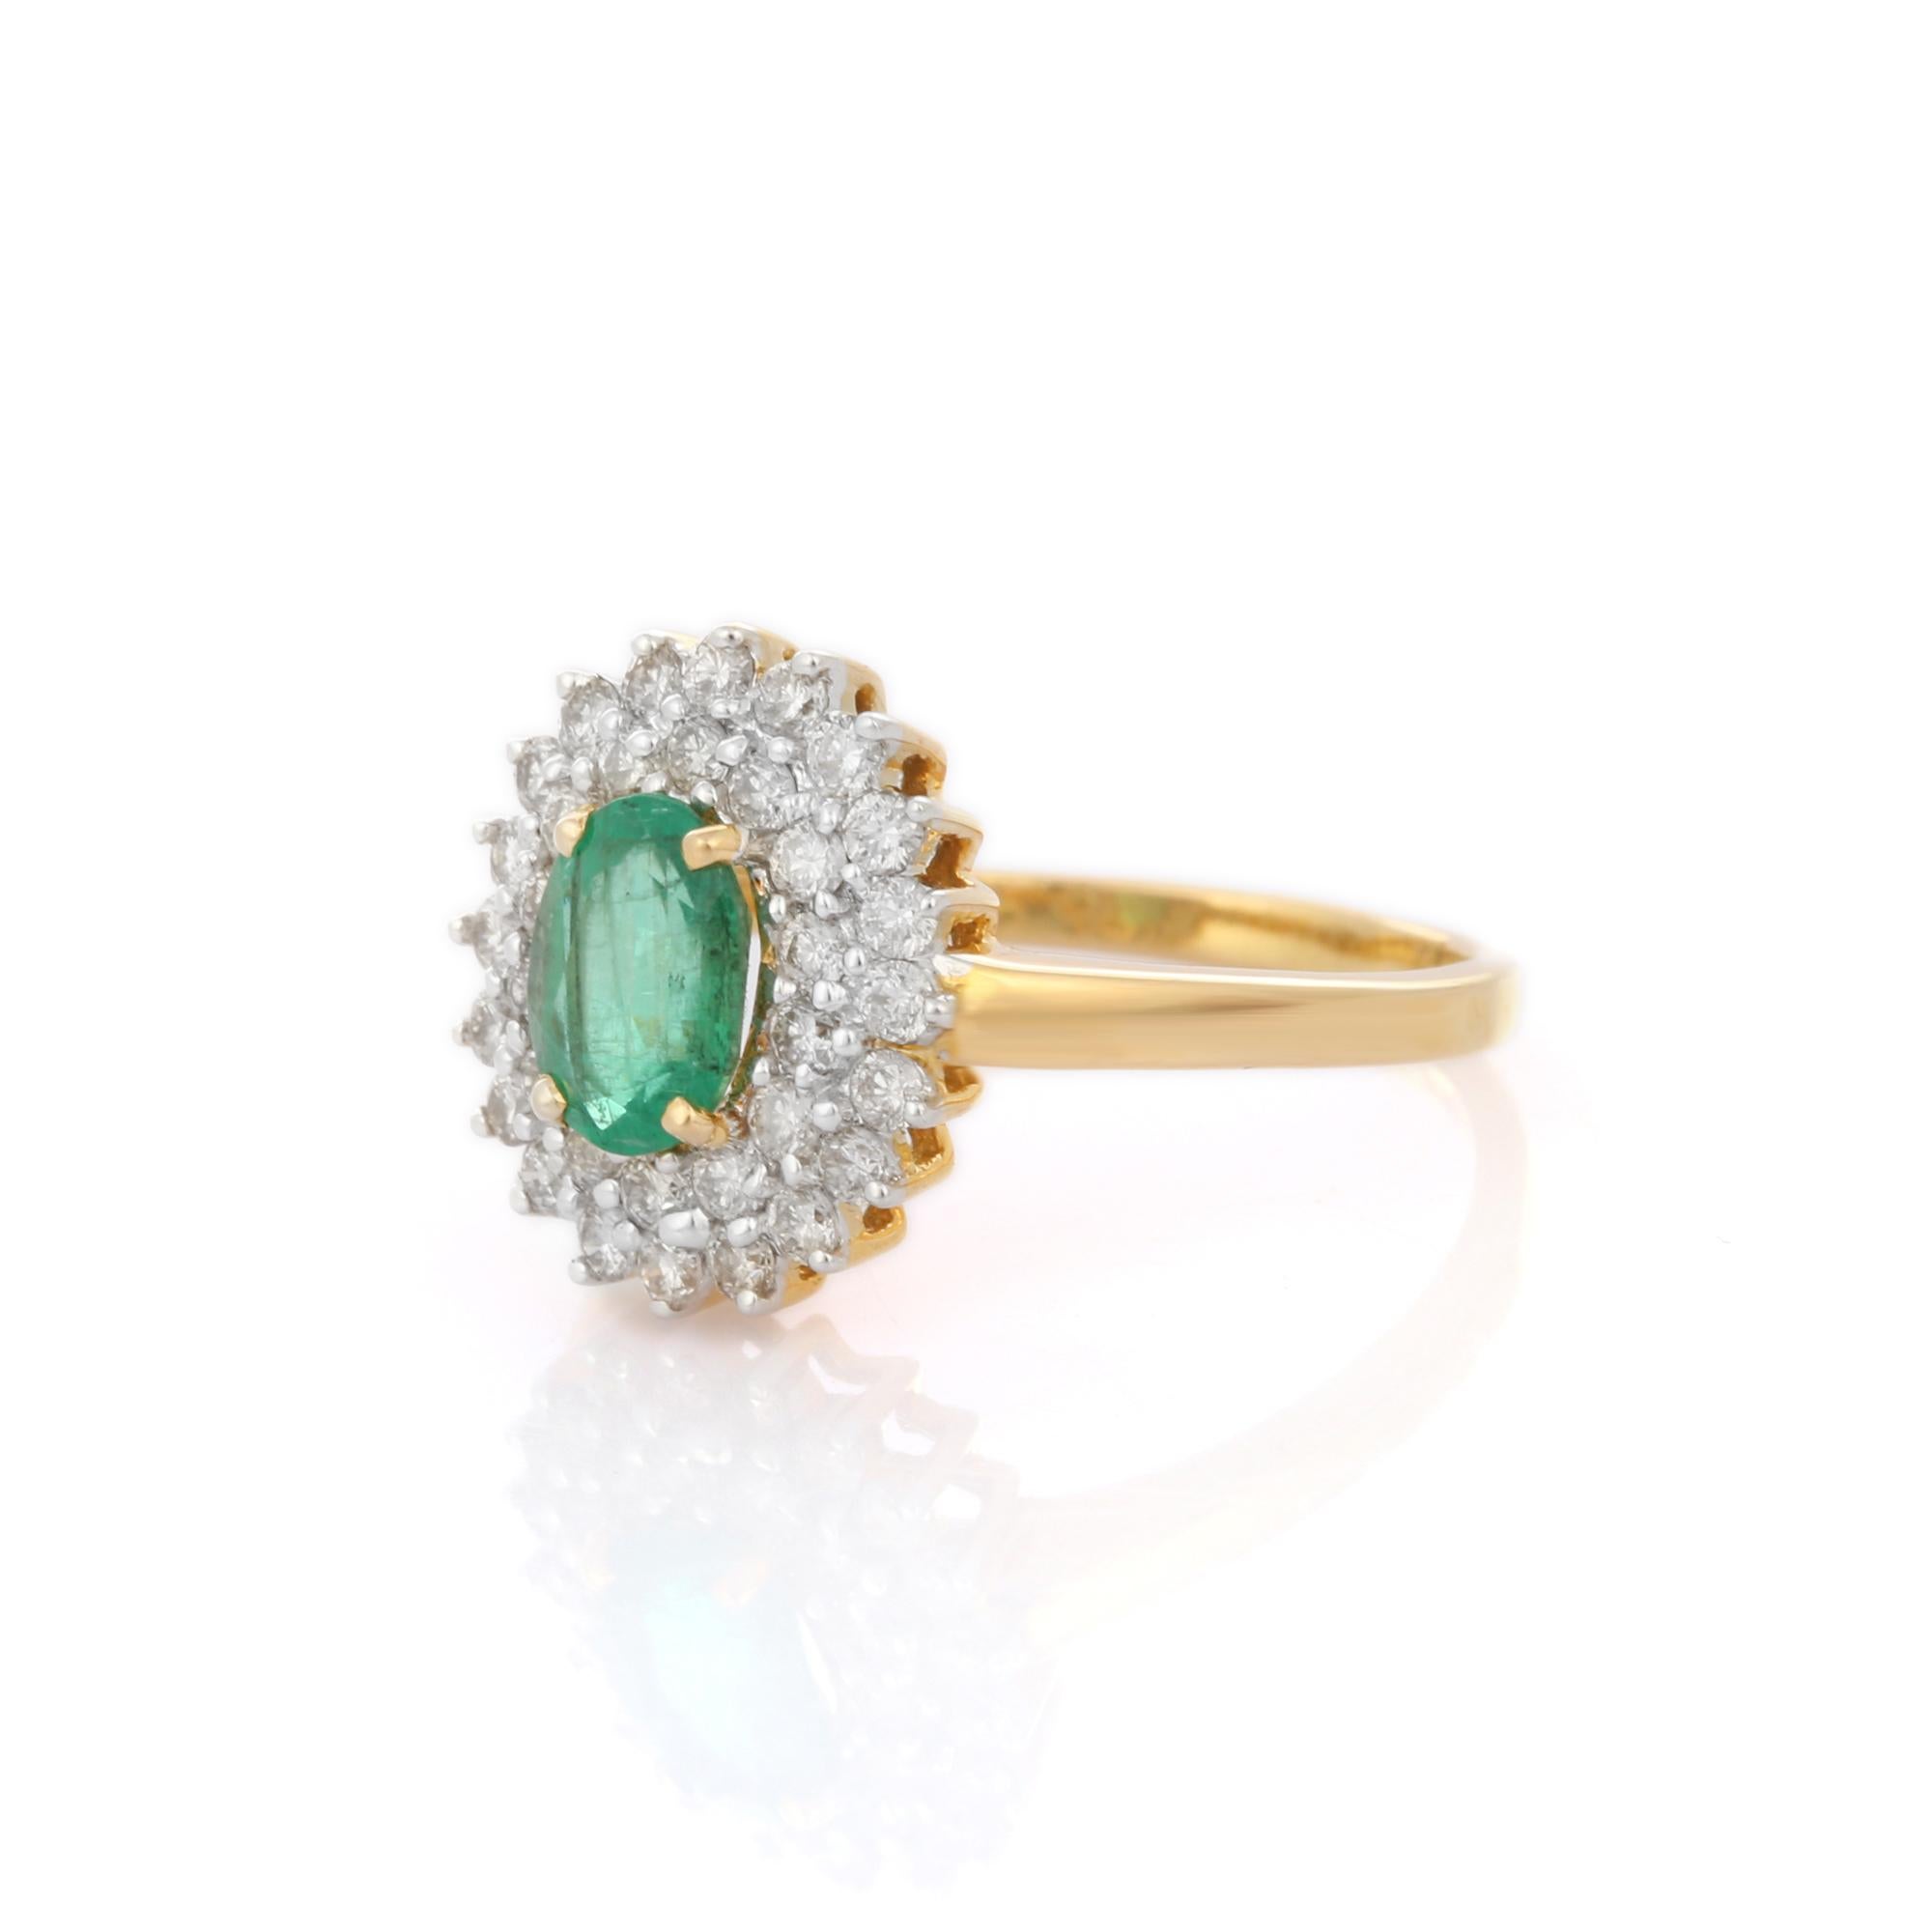 For Sale:  Exquisite 18K Yellow Gold Emerald Halo Diamond Engagement Wedding Ring for Her 3